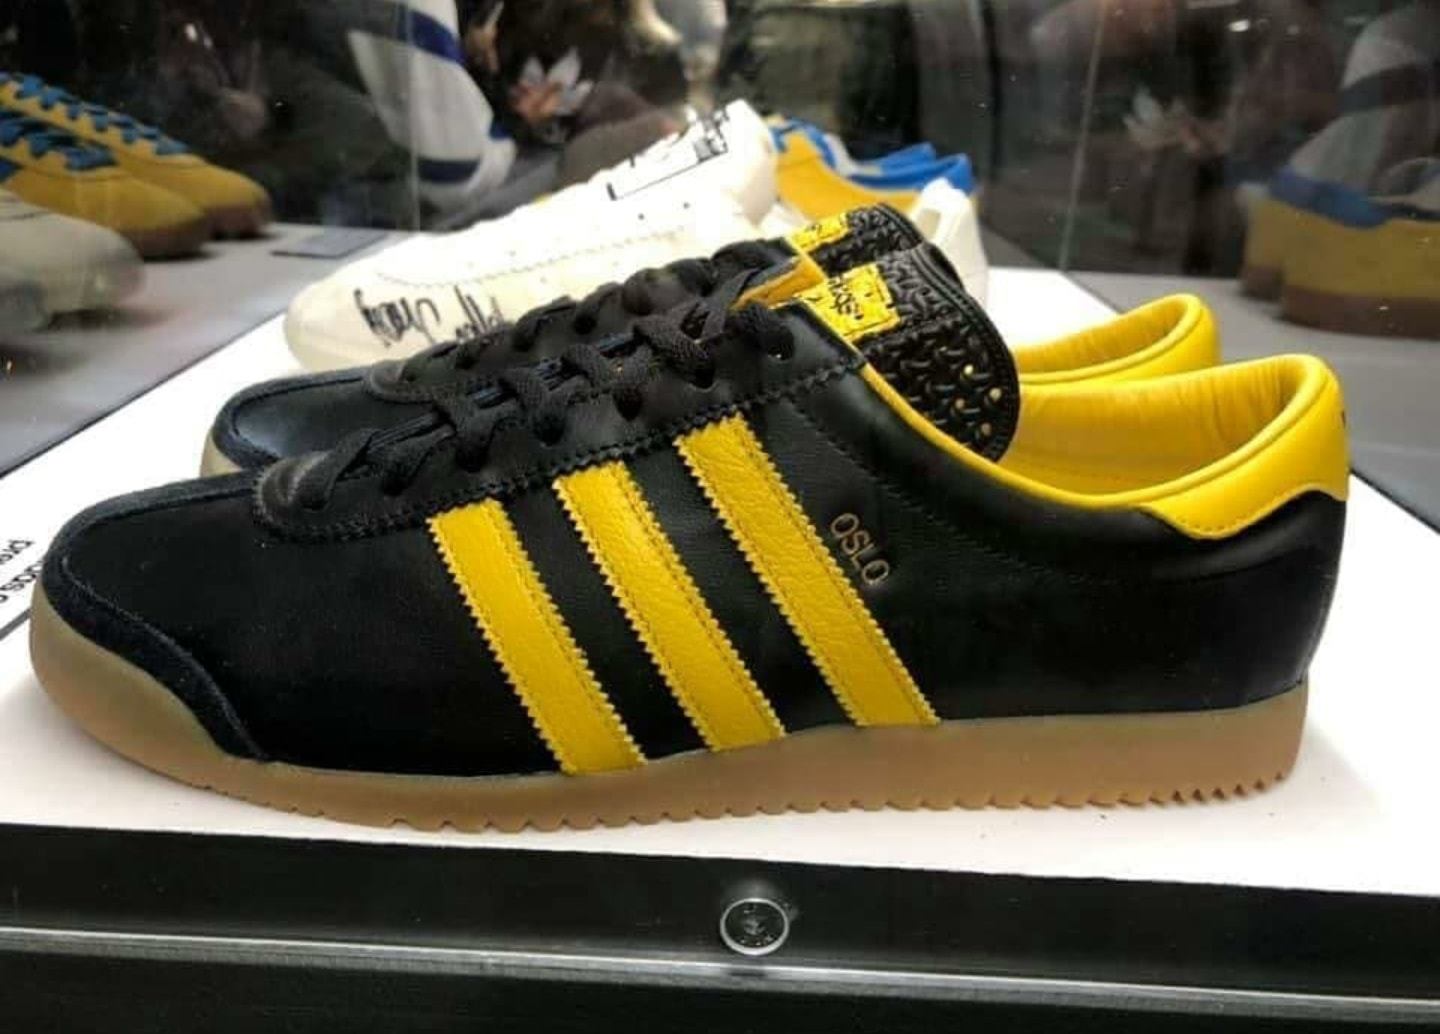 Savings on Twitter: "Another soon ..... adidas Oslo. Part of the City Series for 2019 We going to share it last night, but the Swedish neighbours from Malmo seemed